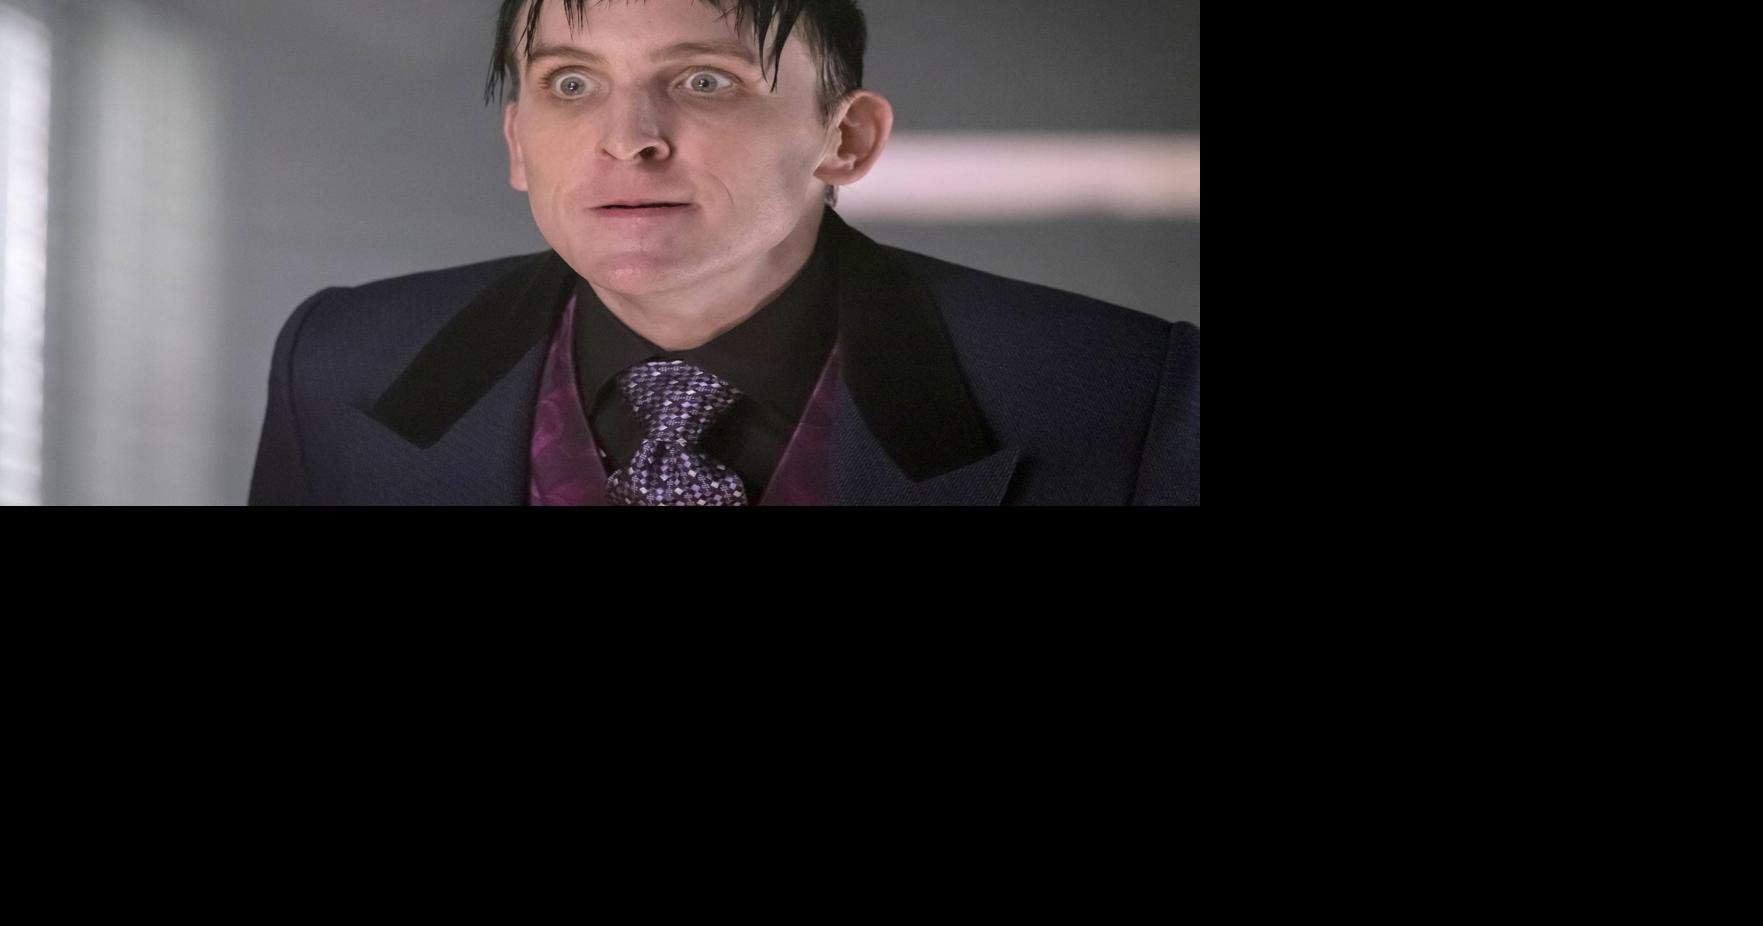 The last waddle: Robin Lord Taylor weighs in on 'Gotham's' Penguin